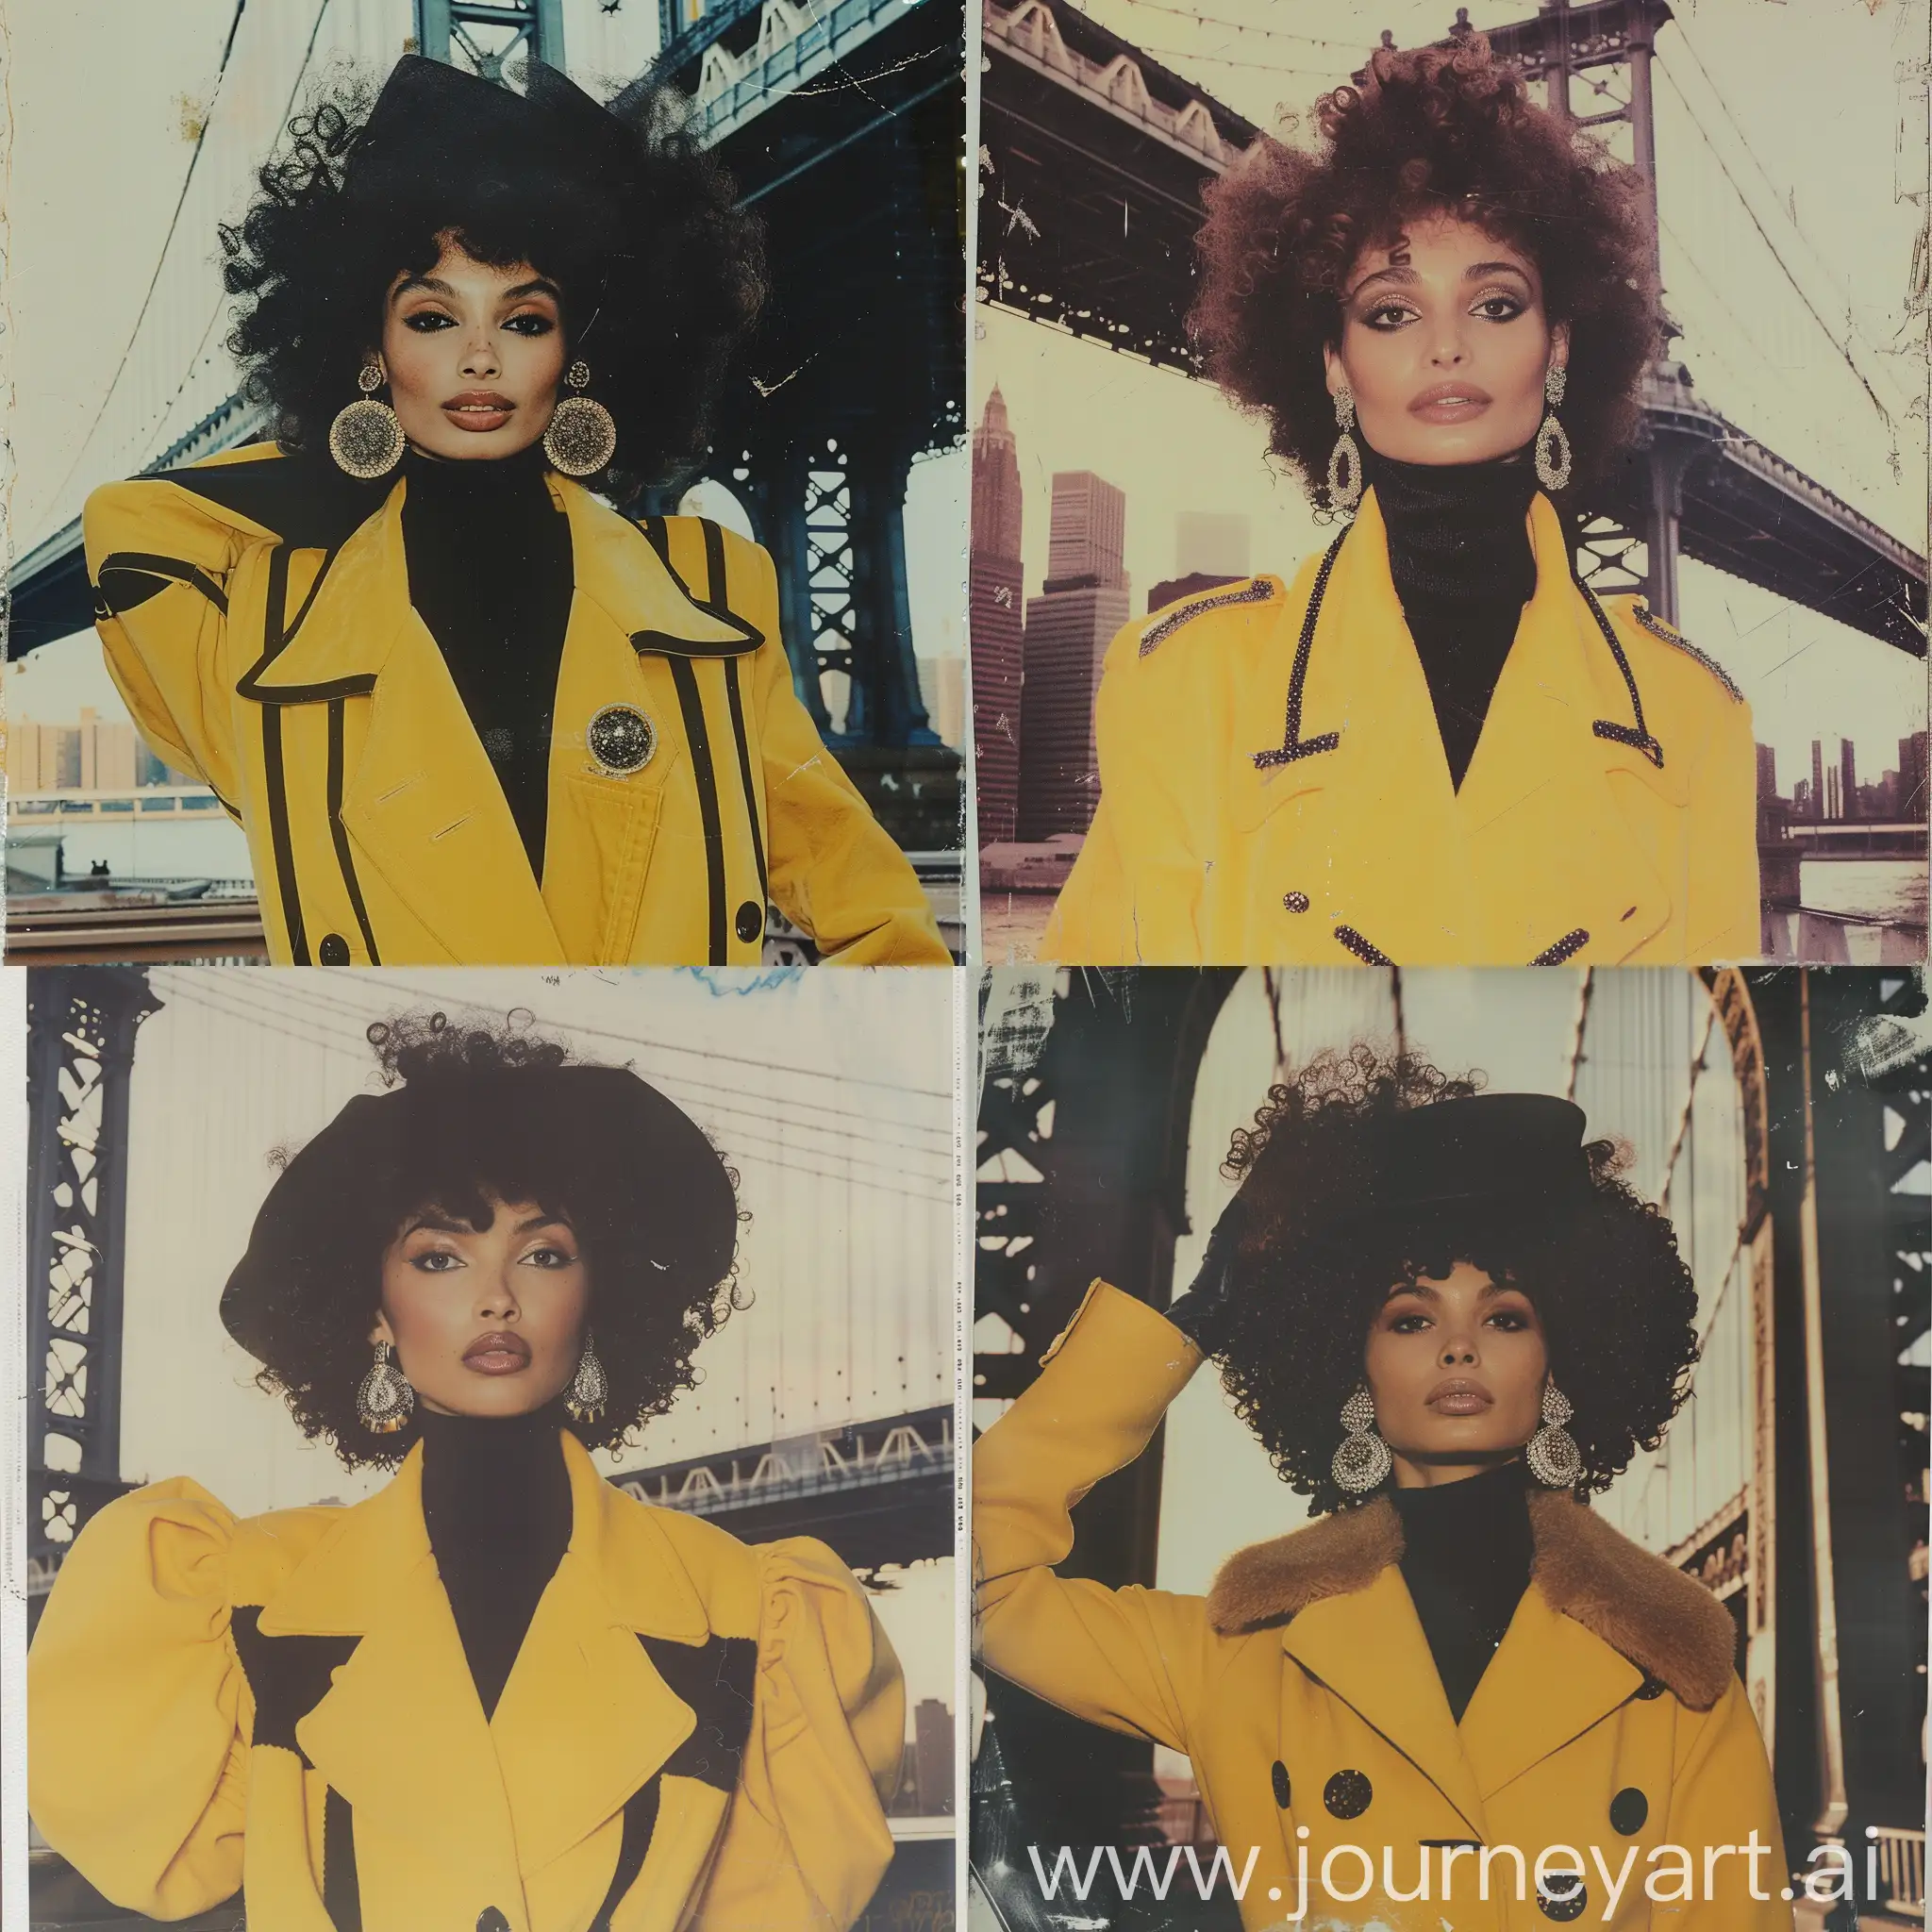 1980s-Fashion-Model-with-Voluminous-Curly-Hair-and-Yellow-Coat